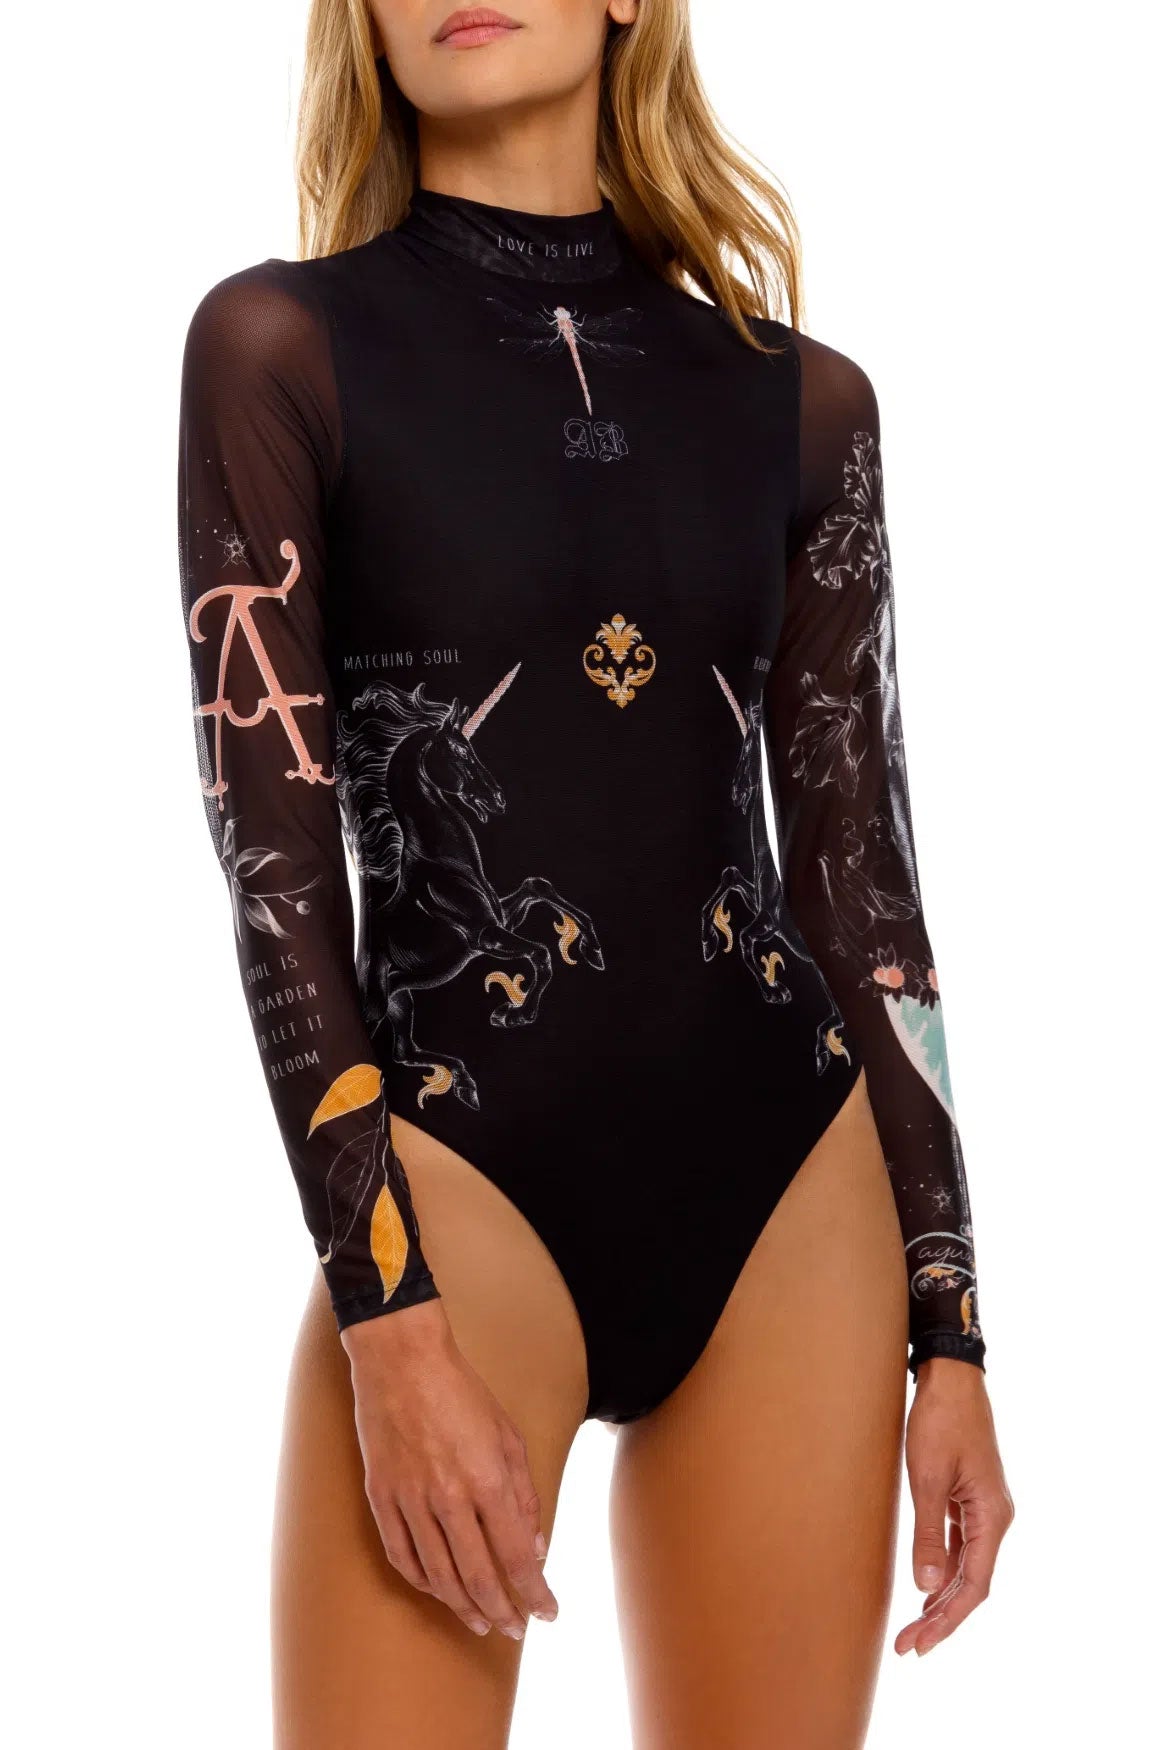 Black printed high neck one piece with long mesh sleeves and outline of two unicorns on suit